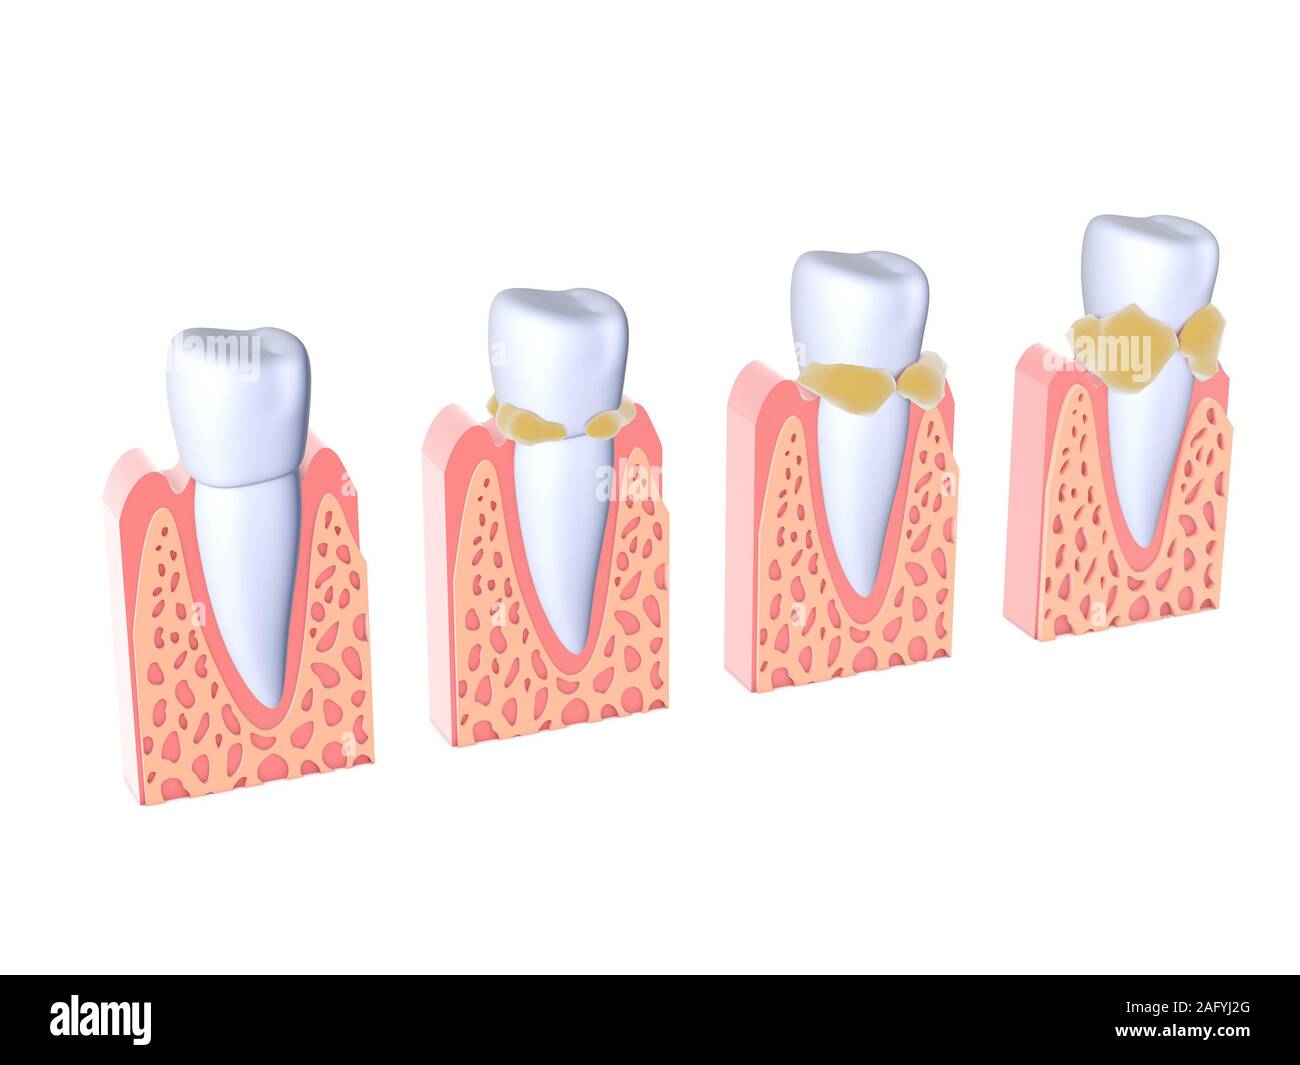 3d illustration of teeth with tartar. Showing four different phases in which it evolves and the gums. Isolated images standing on white background. Stock Photo